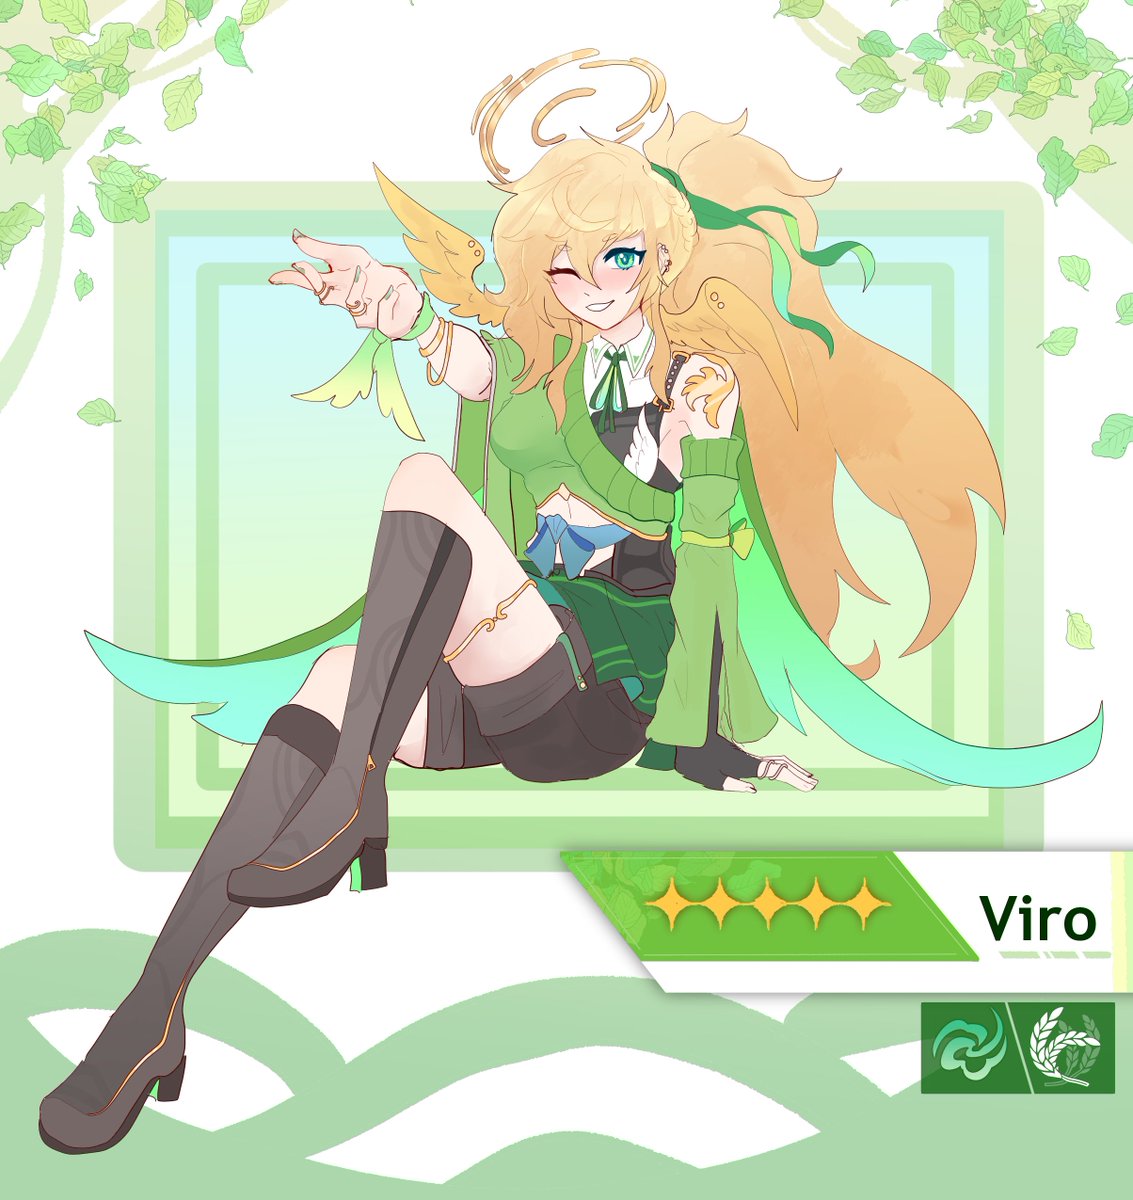 I decided to turn Viro into a Honkai Star Rail character, would you E6 her? 😳